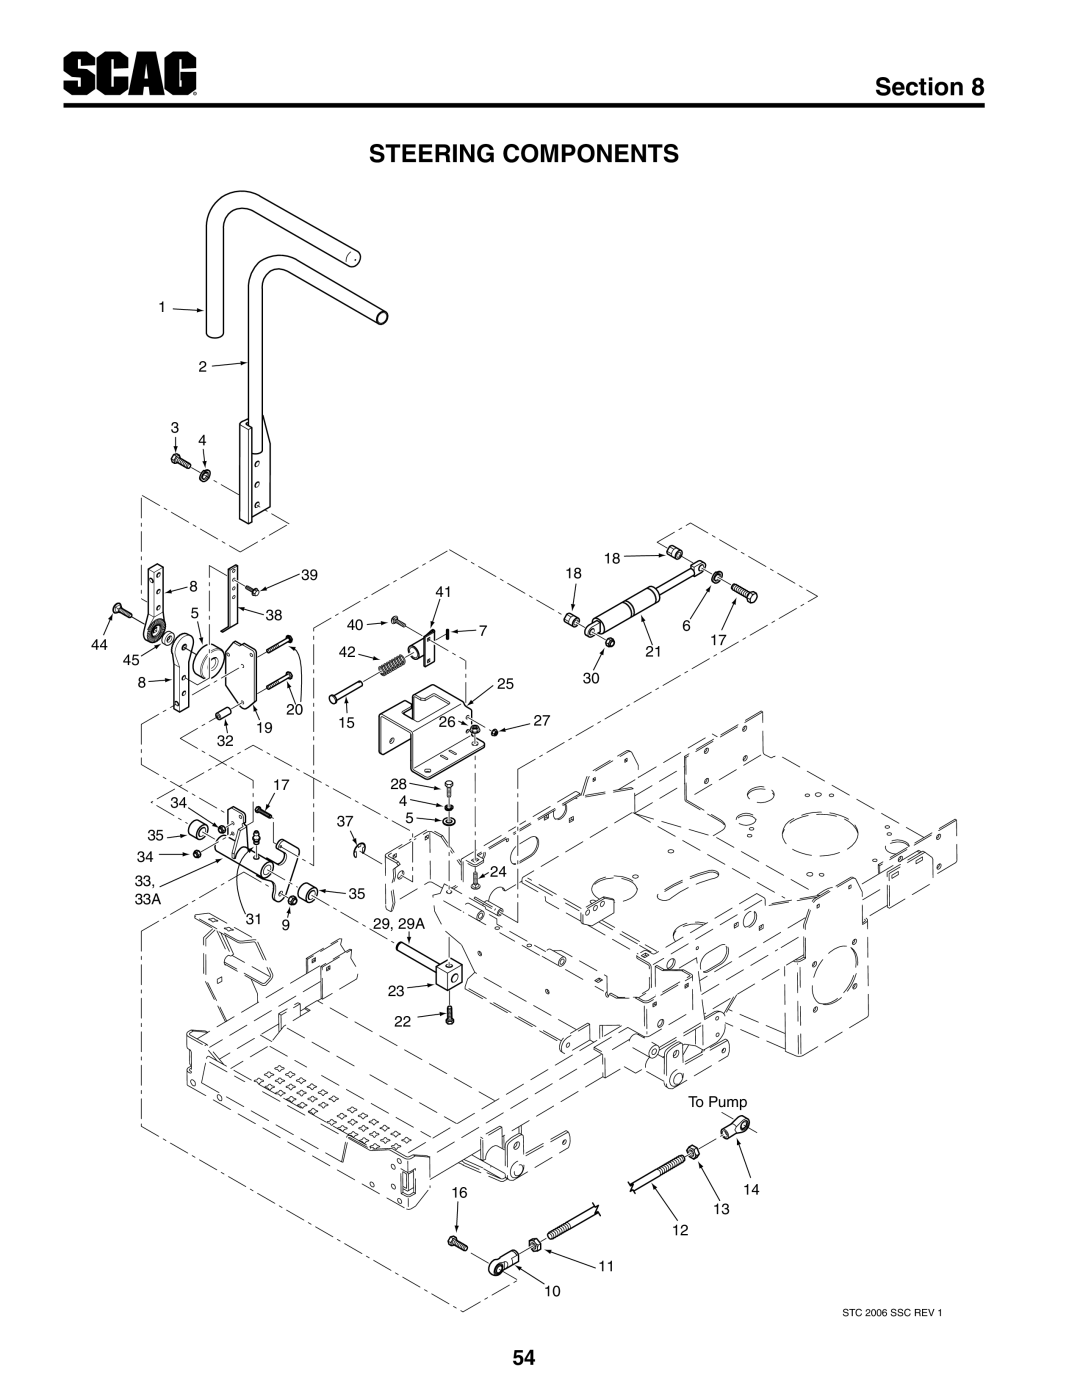 Scag Power Equipment STWC61V-27CV, STWC52V-25KA manual Steering Components, Section, 29, 29A, To Pump, STC 2006 SSC REV 